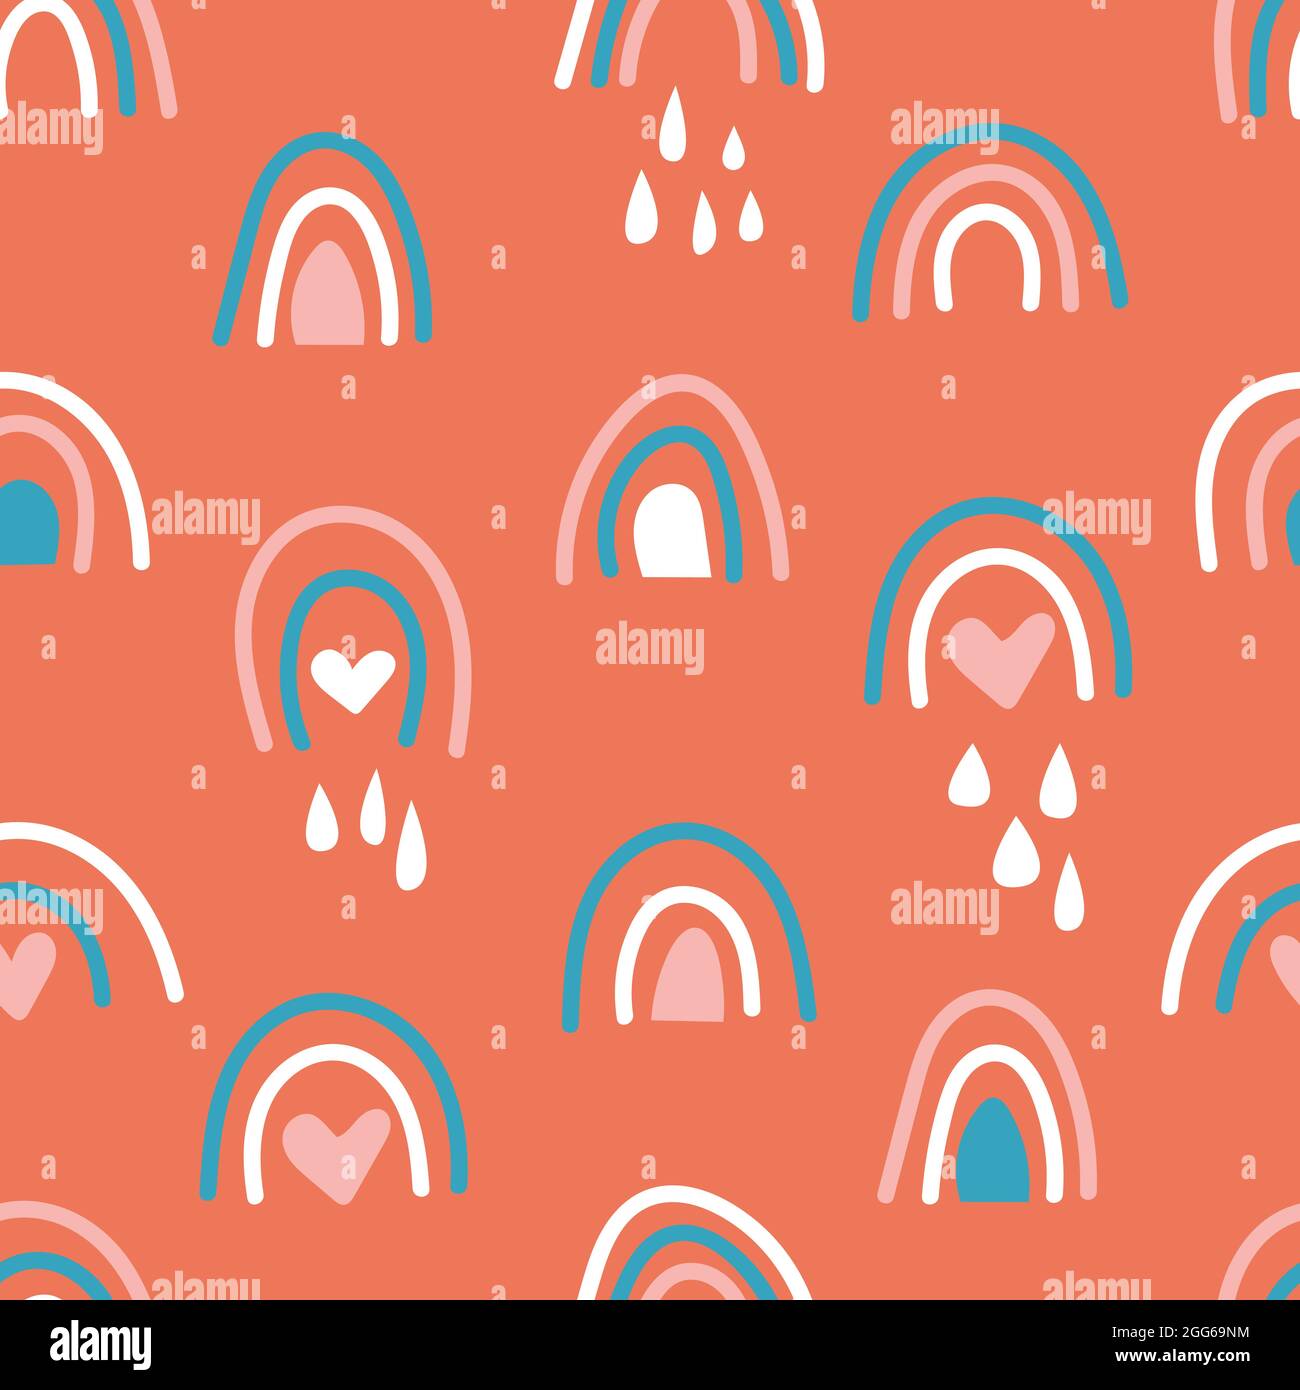 Baby and kids style abstract cute background, retro seamless